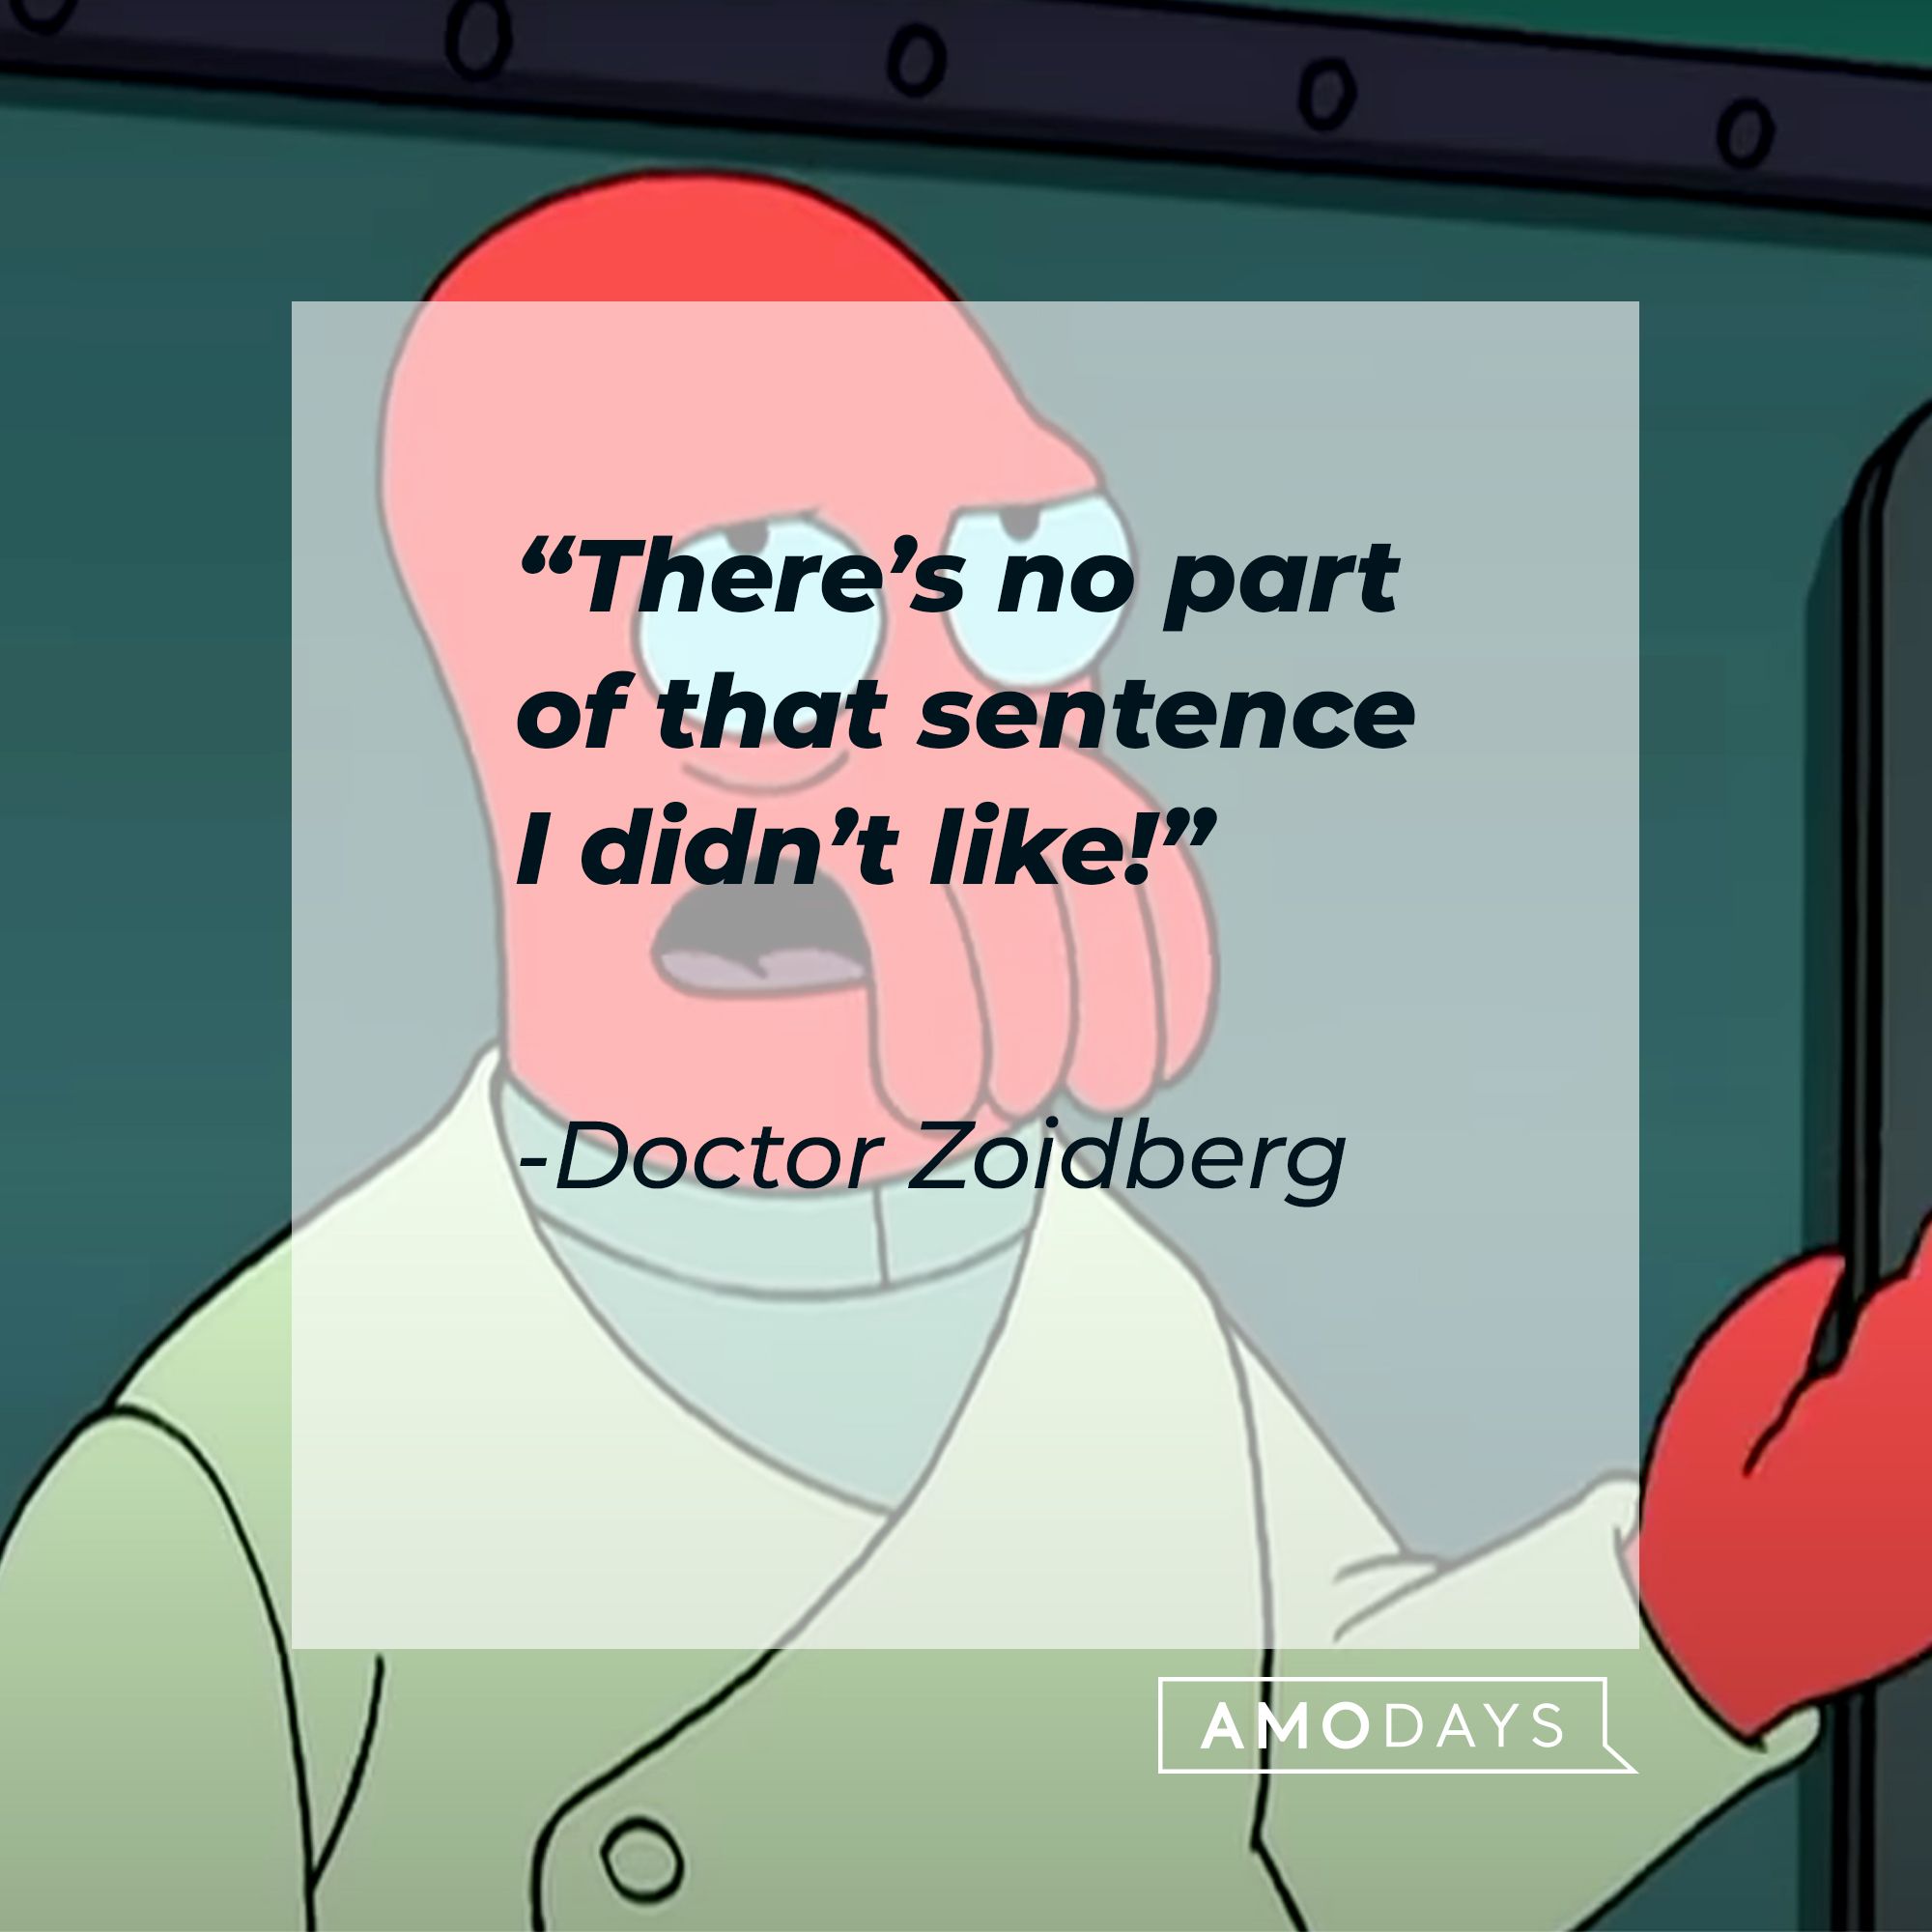 Doctor Zoidberg, with his quote: There’s no part of that sentence I didn’t like!” | Source:  facebook.com/Futurama